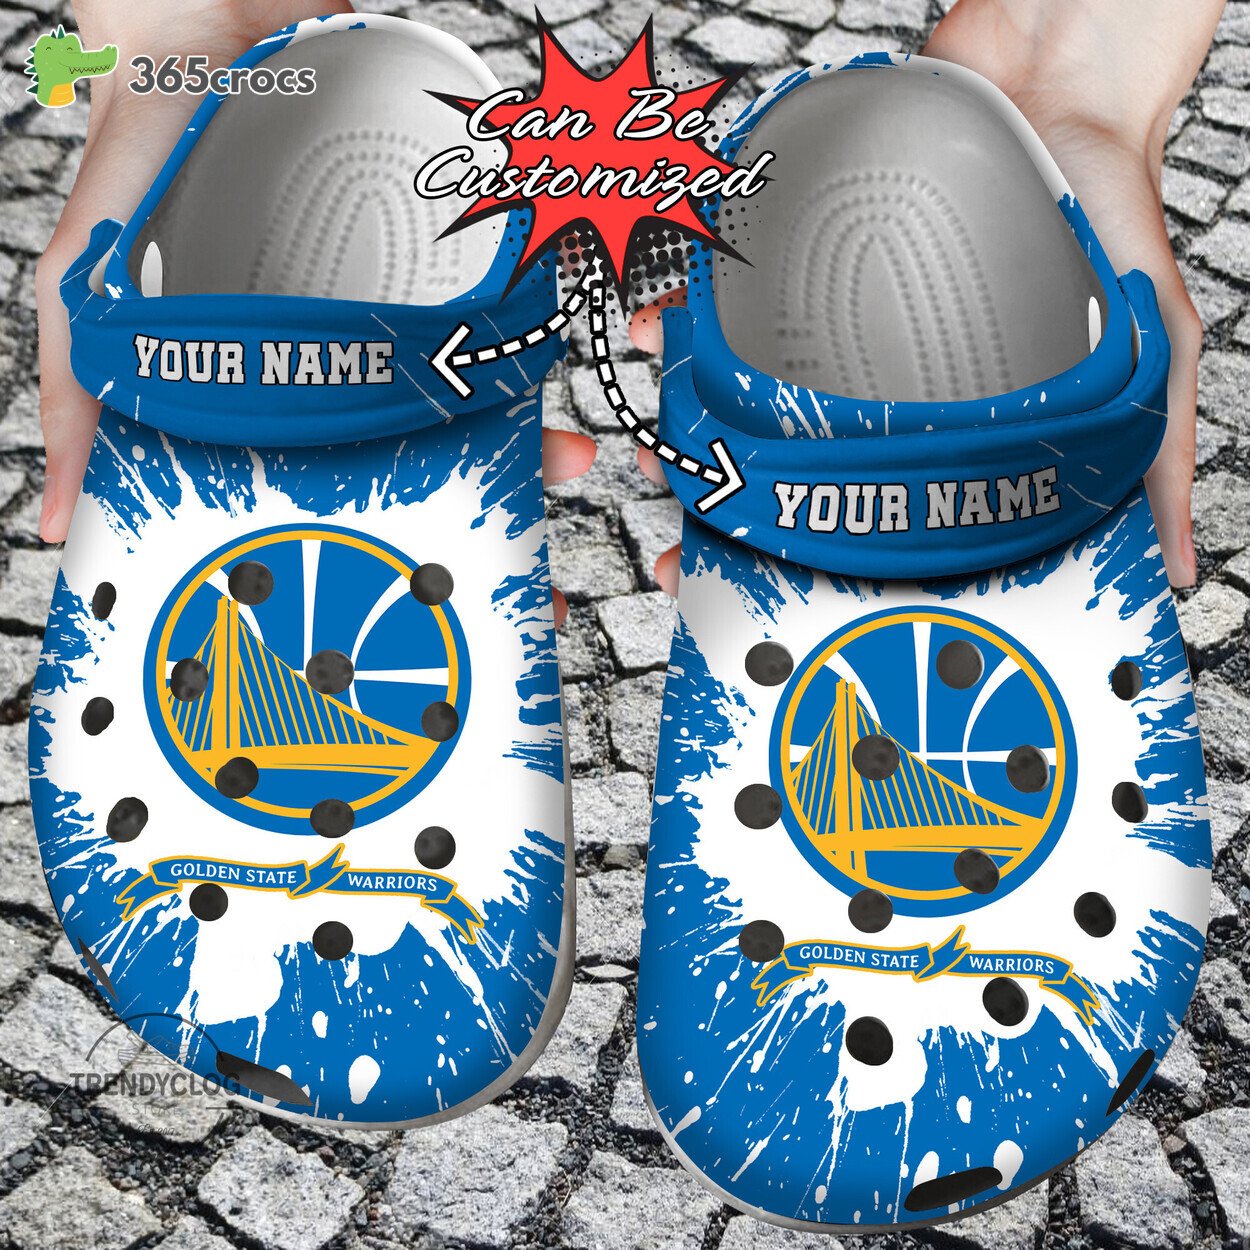 Basketball Fans’ Must Have Golden State Warriors Team Inspired Clog Shoes